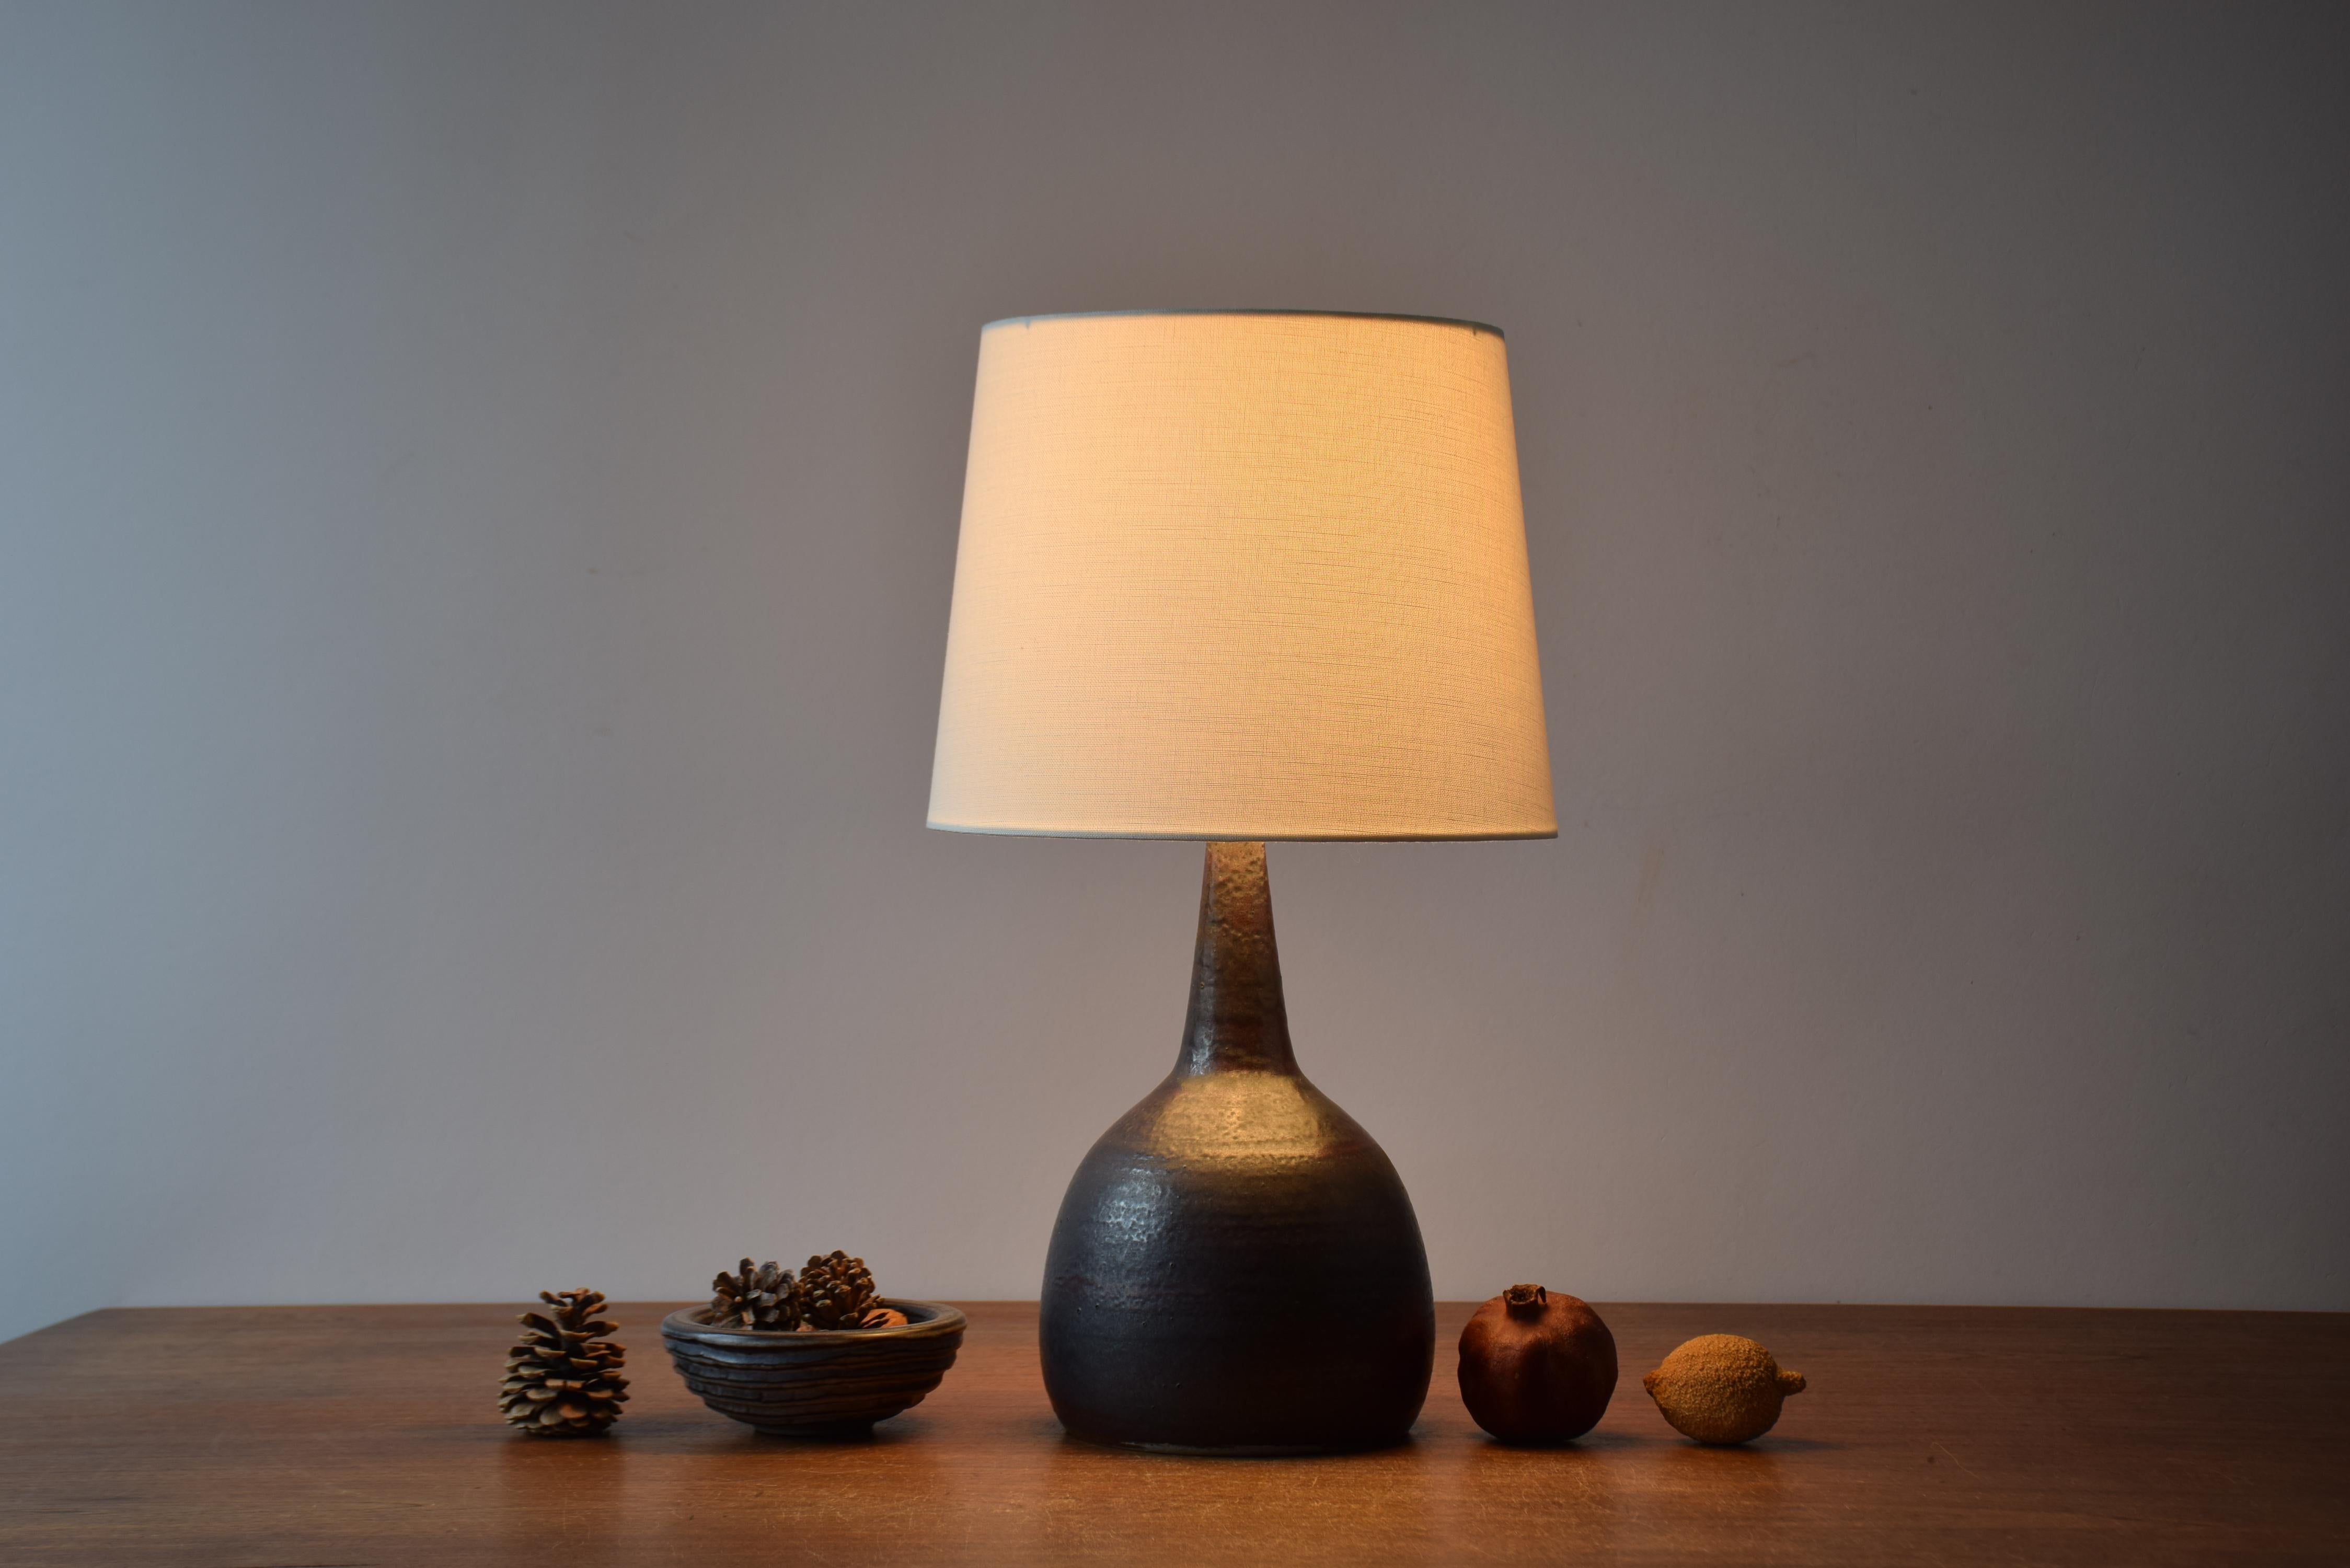 Tall Mid-century Danish ceramic table lamp designed by Per Linnemann-Schmidt for Palshus. Made circa 1960s to early 1970s. 

The glaze is a mixture of brown shades with rust colored elements. It's a rare model from Palshus.

The lamp is made from